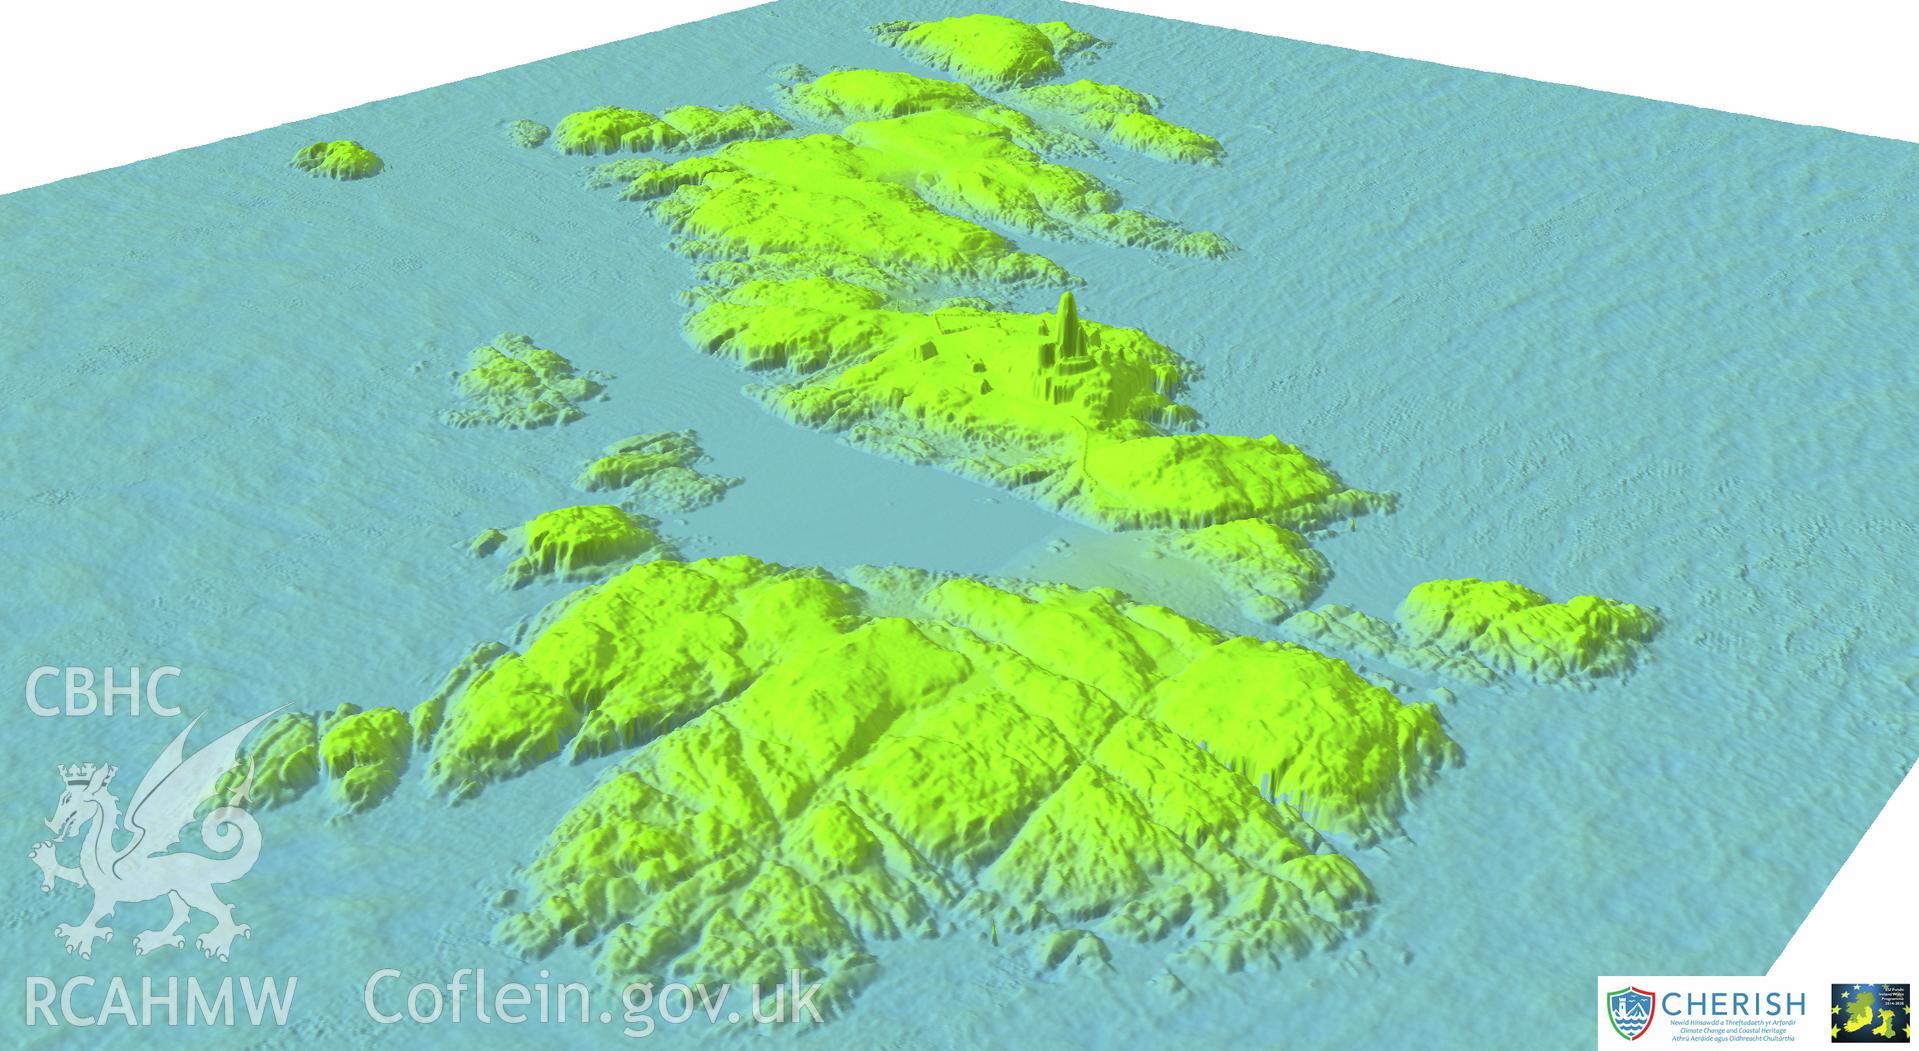 Ynysoedd y Moelrhoniaid (The Skerries islet). Airborne laser scanning (LiDAR) commissioned by the CHERISH Project 2017-2021, flown by Bluesky International LTD at low tide on 24th February 2017. View showing The Skerries Islet and its lighthouse from the